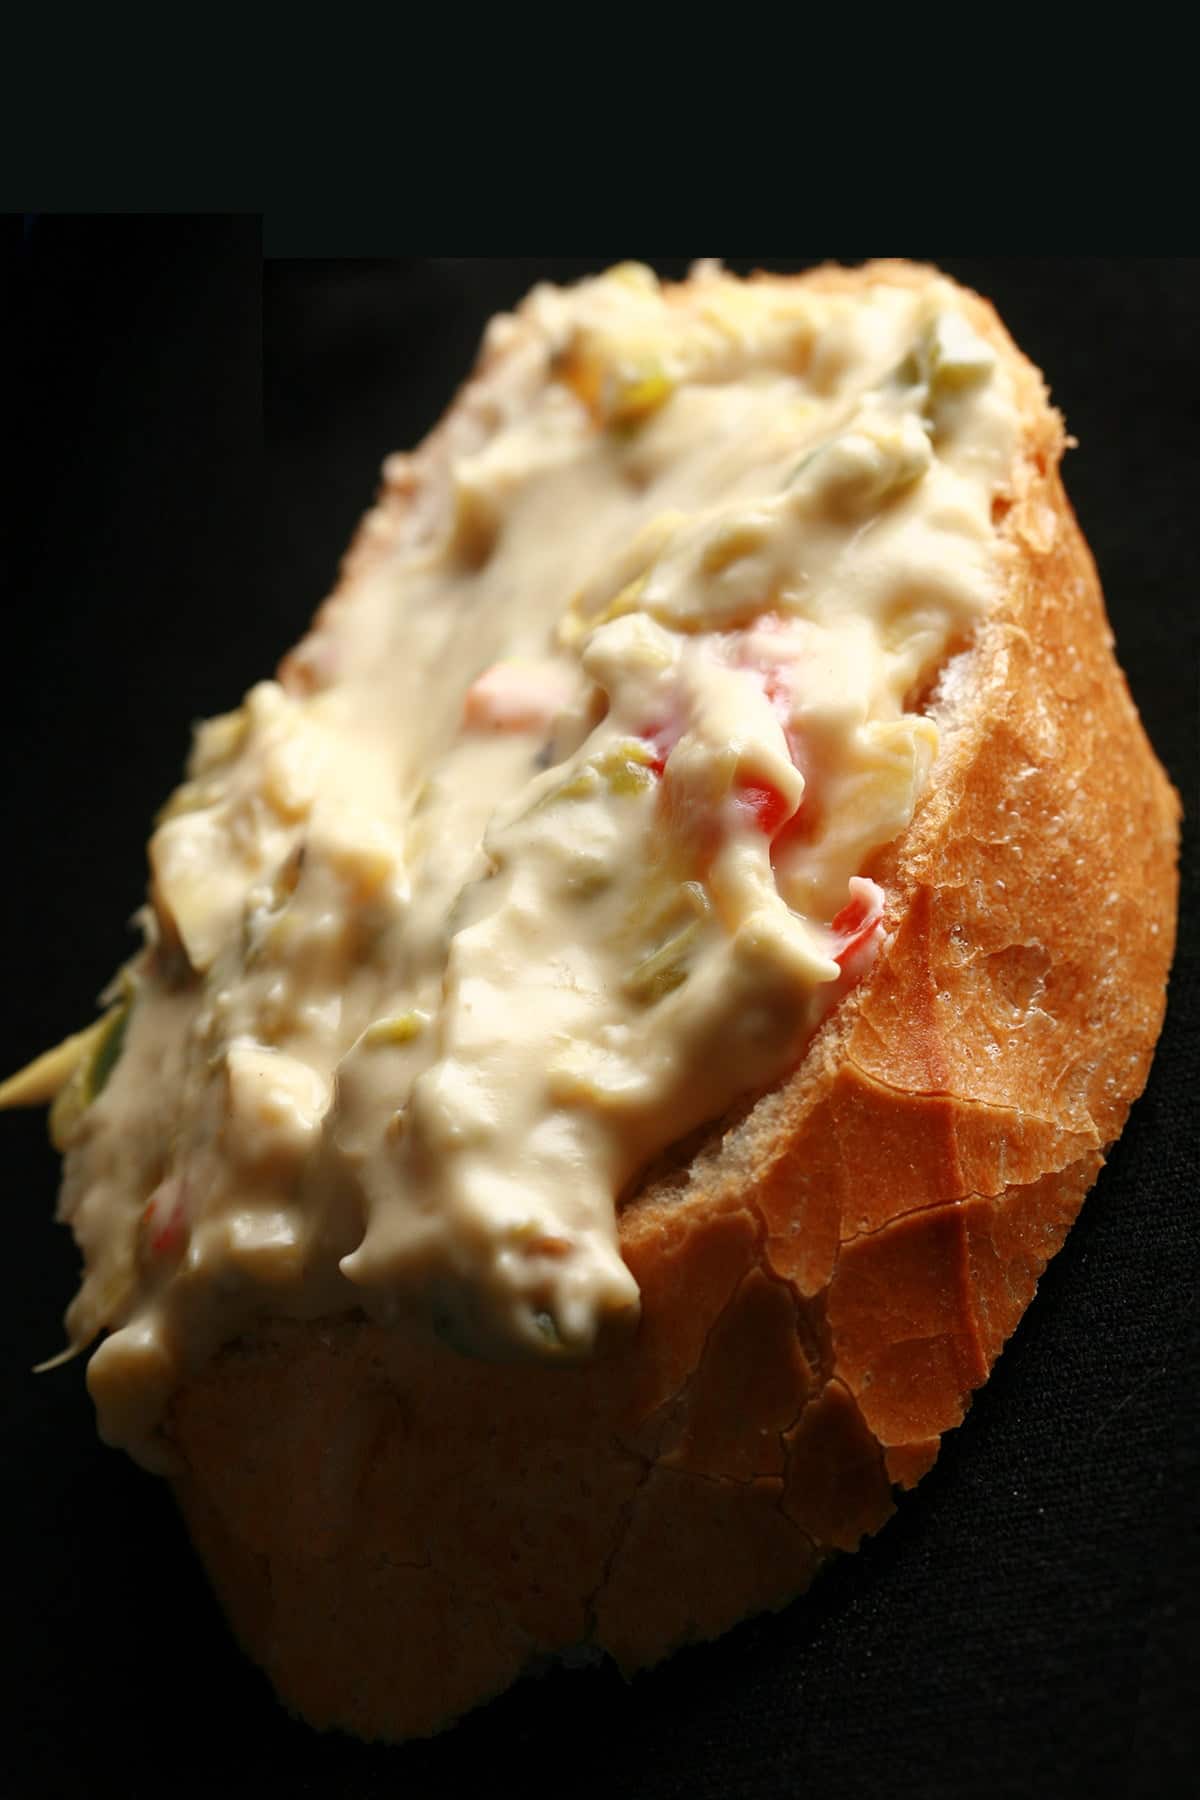 A slice of baguette spread with Backfire dip - a chunky jalapeno artichoke cheese dip.